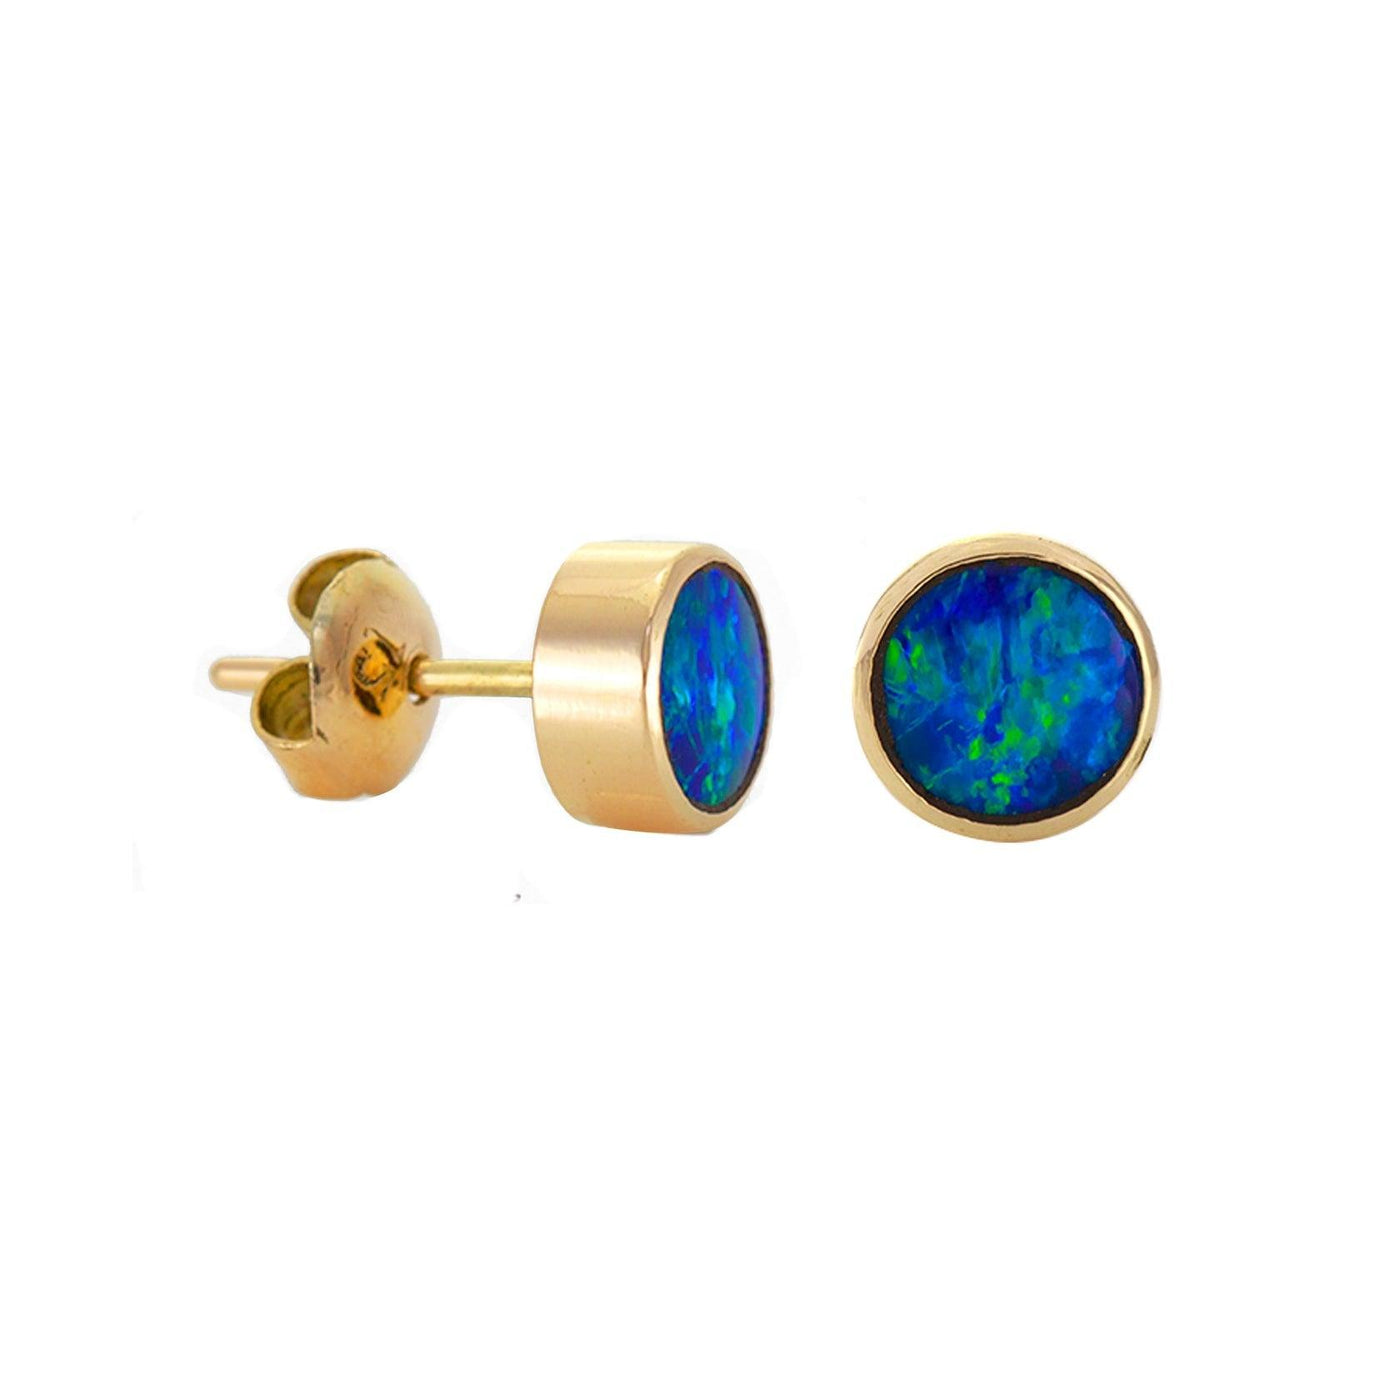 Simon Alexander 9ct Yellow Gold and Opal Doublet Round Stud Earrings - Rococo Jewellery